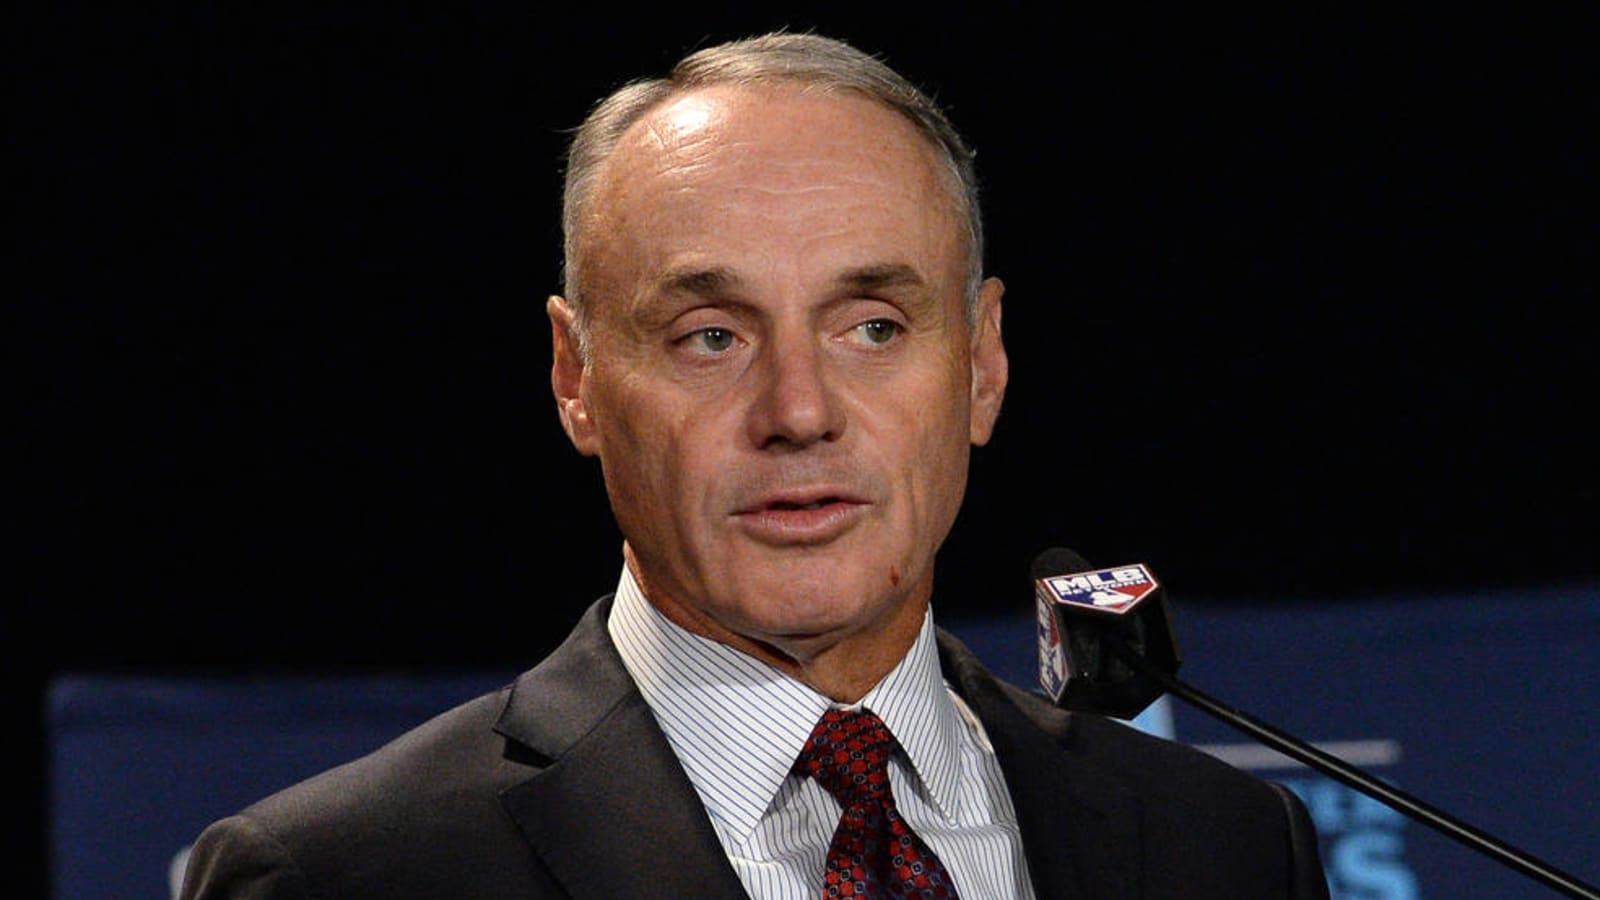 Rob Manfred’s disastrous press conference shows how badly MLB mismanaged Astros crisis